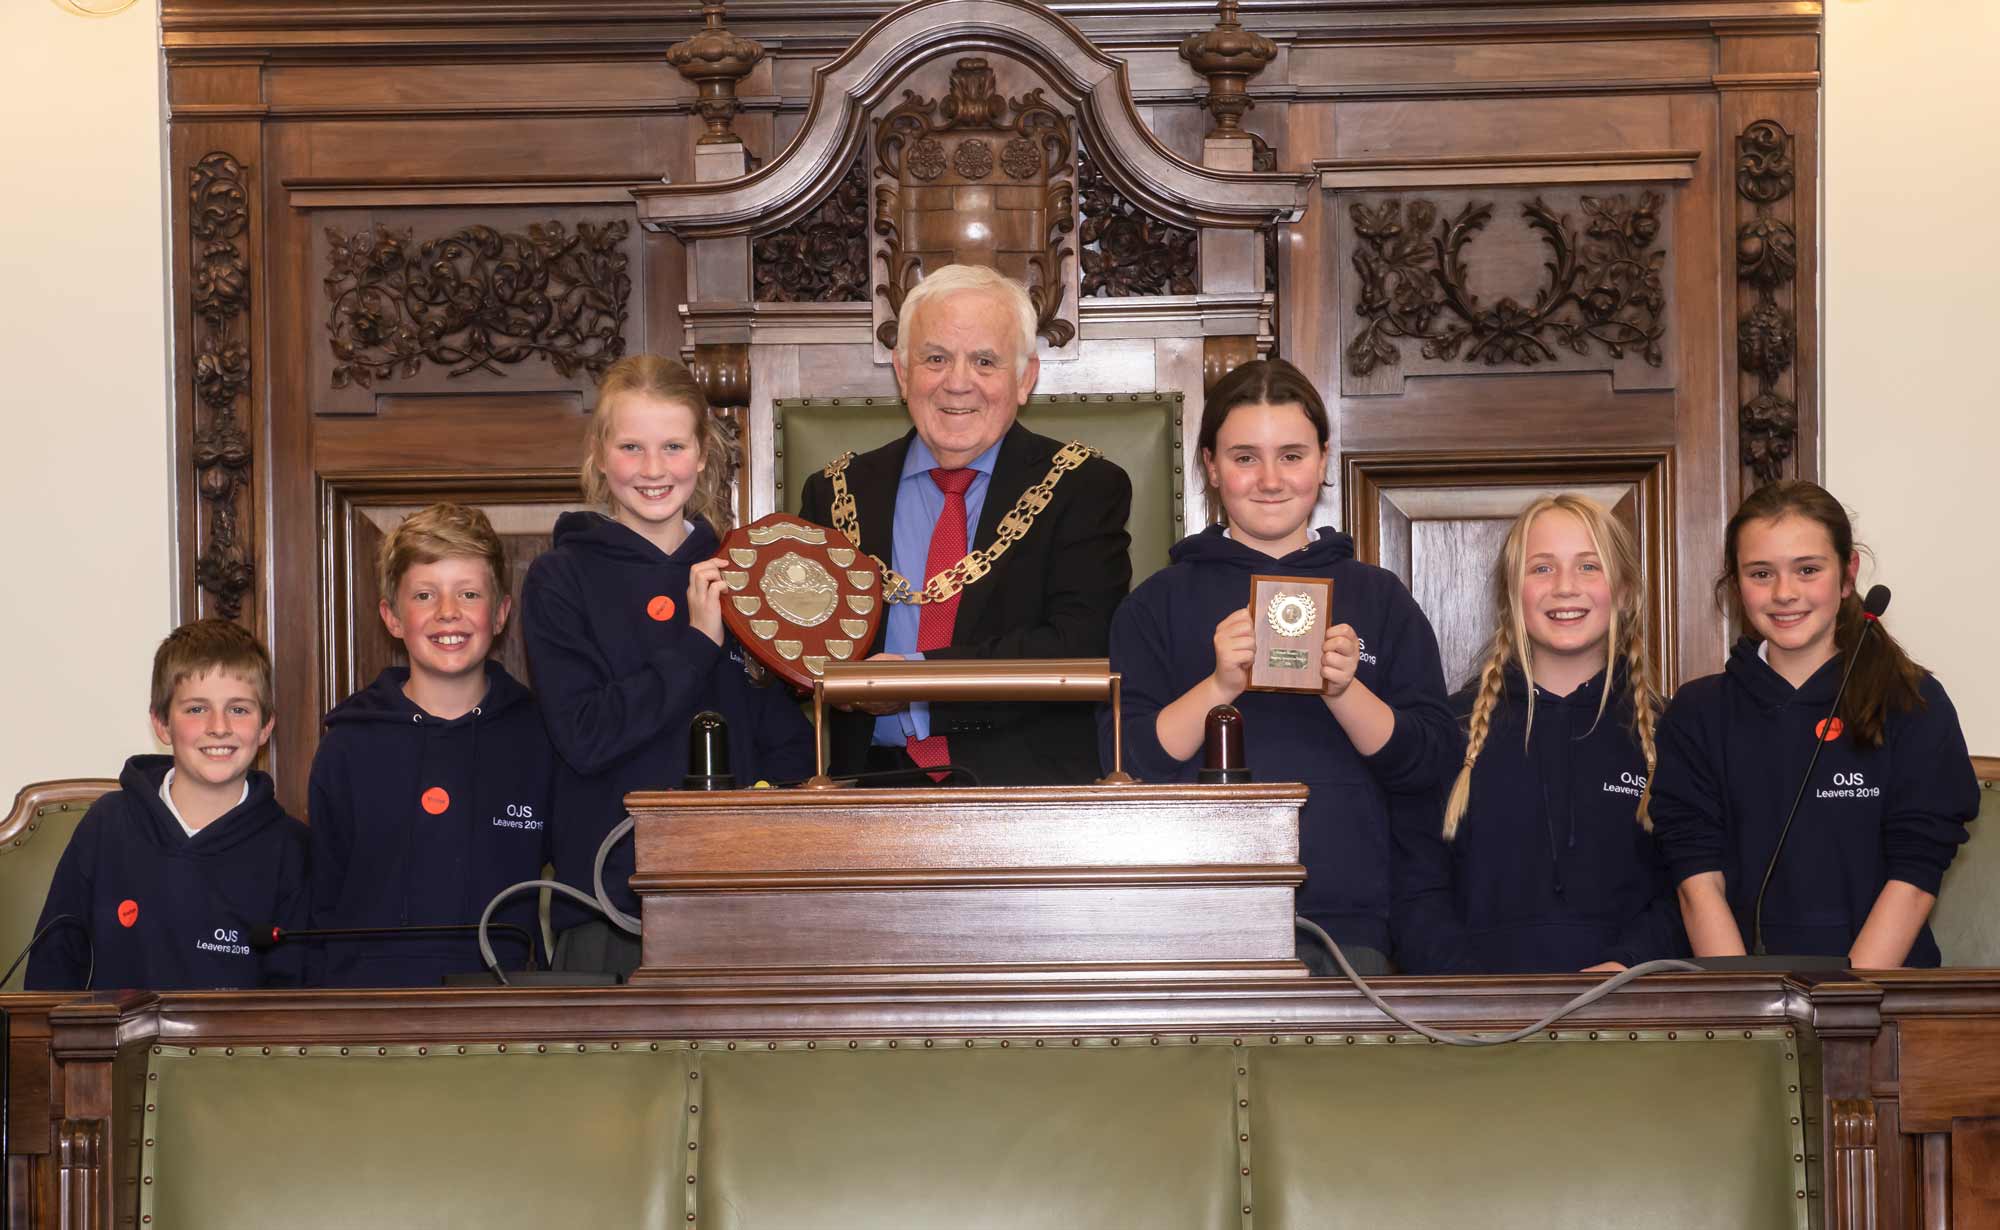 the winning team from Oatlands Junior School in Harrogate with North Yorkshire County Council Chairman, Cllr Jim Clark